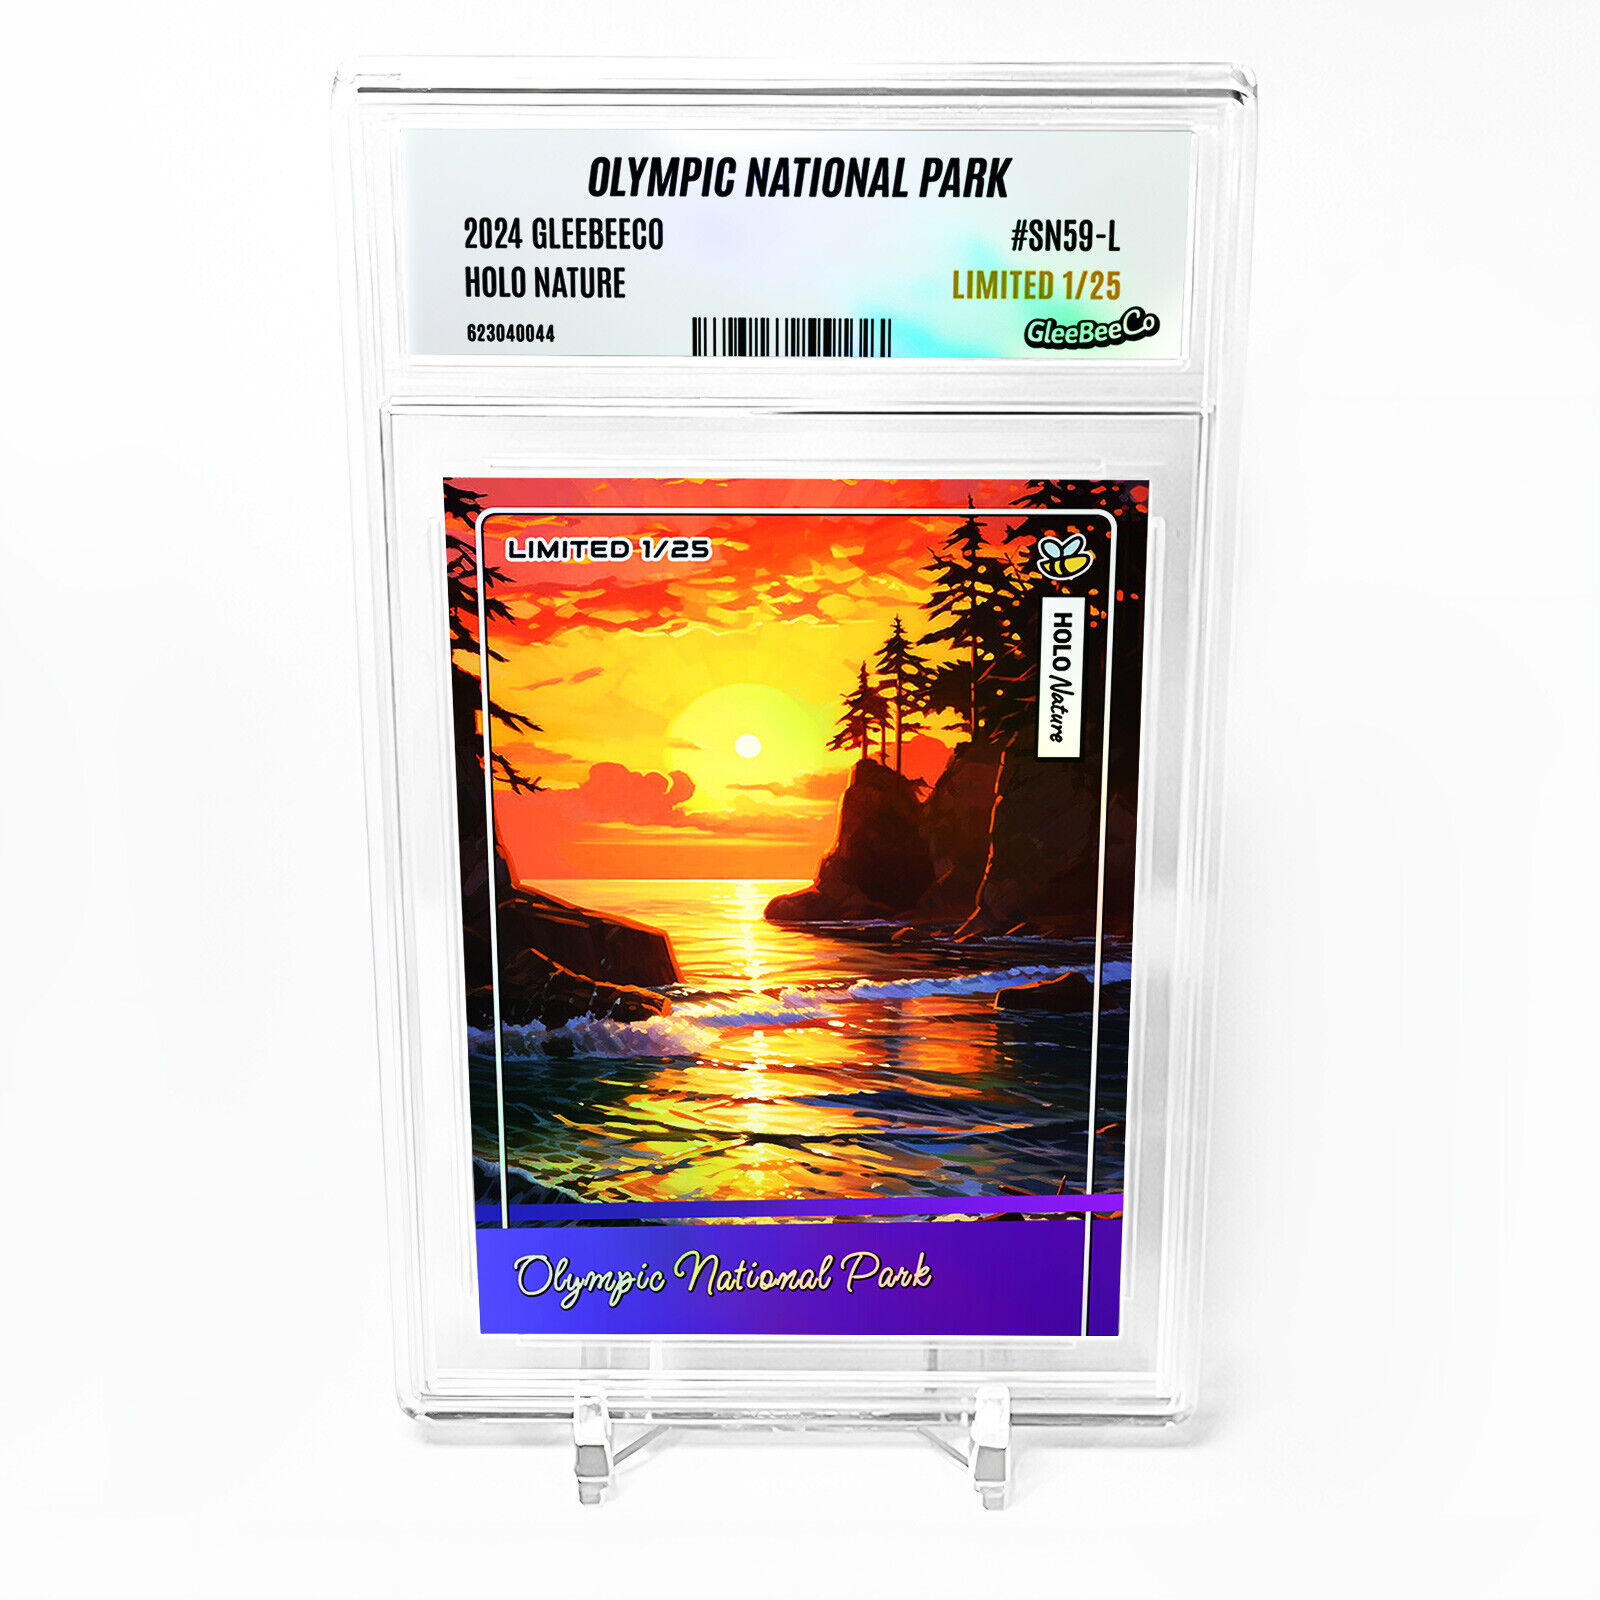 OLYMPIC NATIONAL PARK Holographic Card 2024 GleeBeeCo Slabbed #SN59-L Only /25